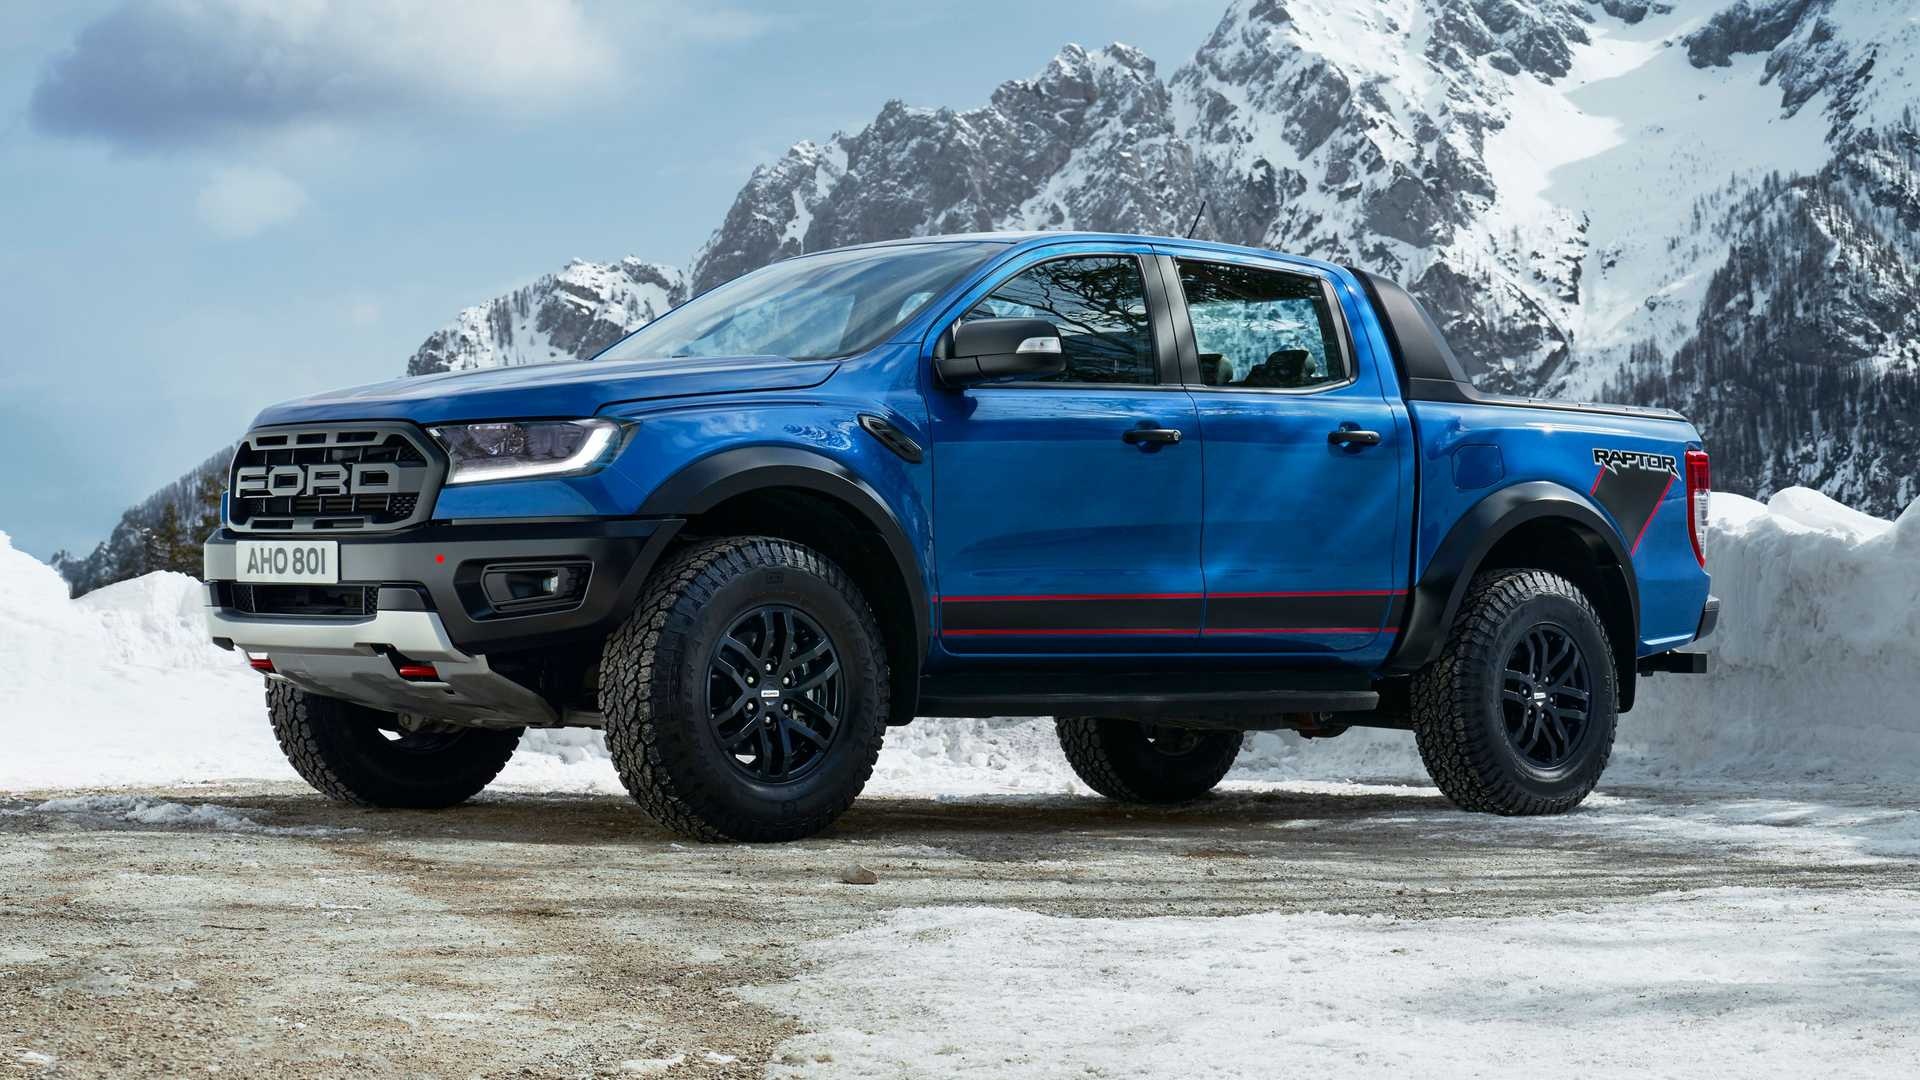 Ford Ranger: The 2011 model year was the final model year for regular sales in North America. 1920x1080 Full HD Wallpaper.